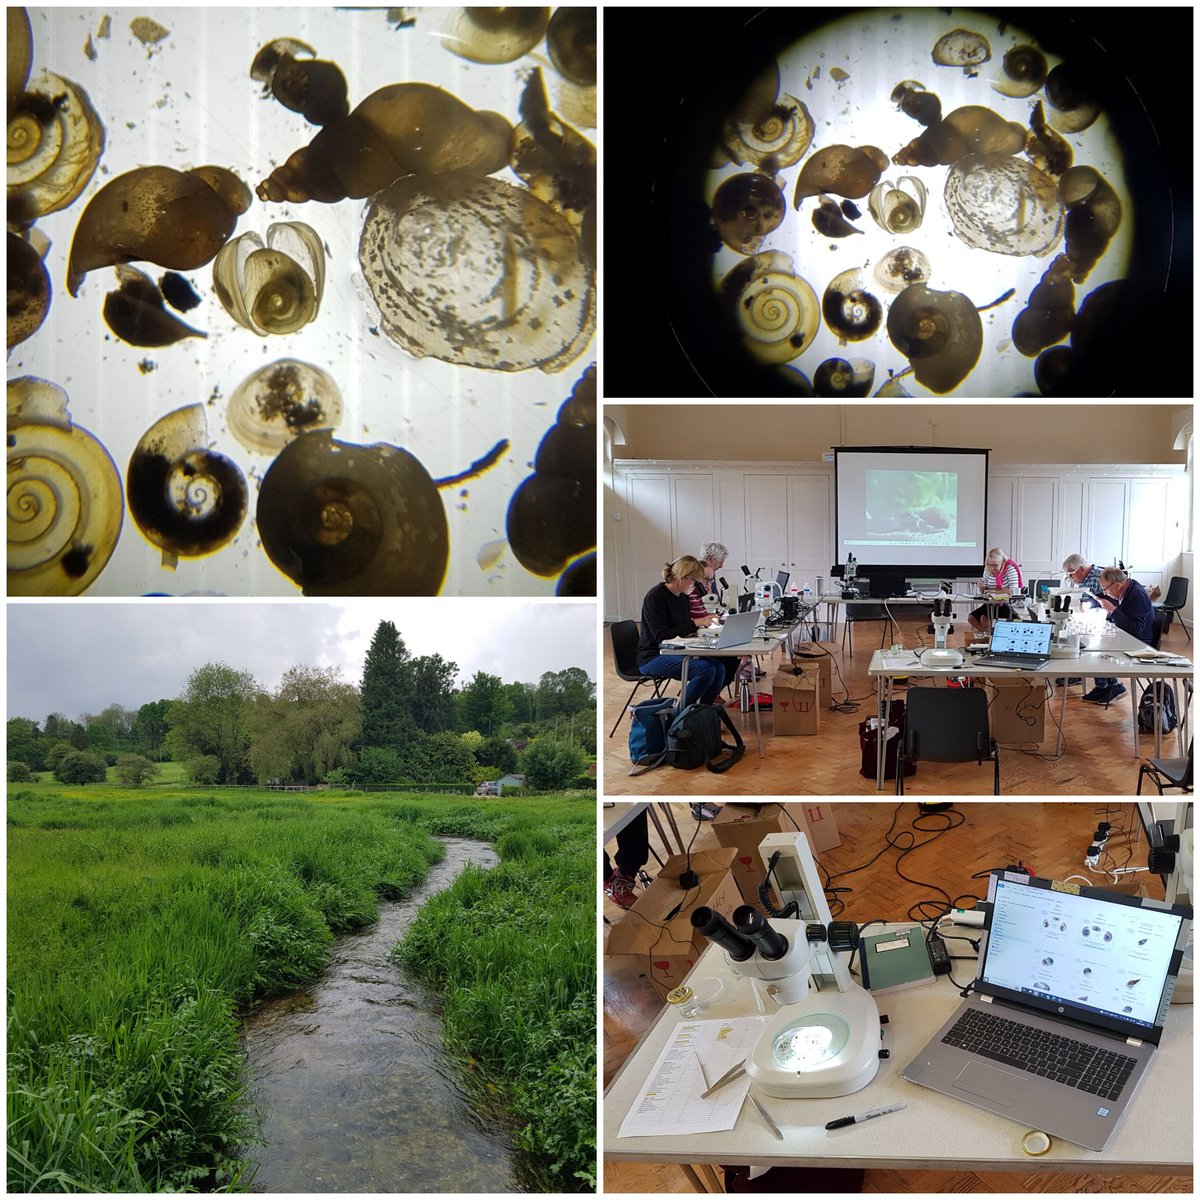 News for fans of  #WatercressAndWinterbournes
We are beavering away on our @WildFishCons #SmartRivers samples😅 Here are some volunteers, limpets, pea mussels and snails. 
Wonderful chalkstreams😍💚
Made possible by @HeritageFundUK 
@HantsIWWildlife 
#rivers